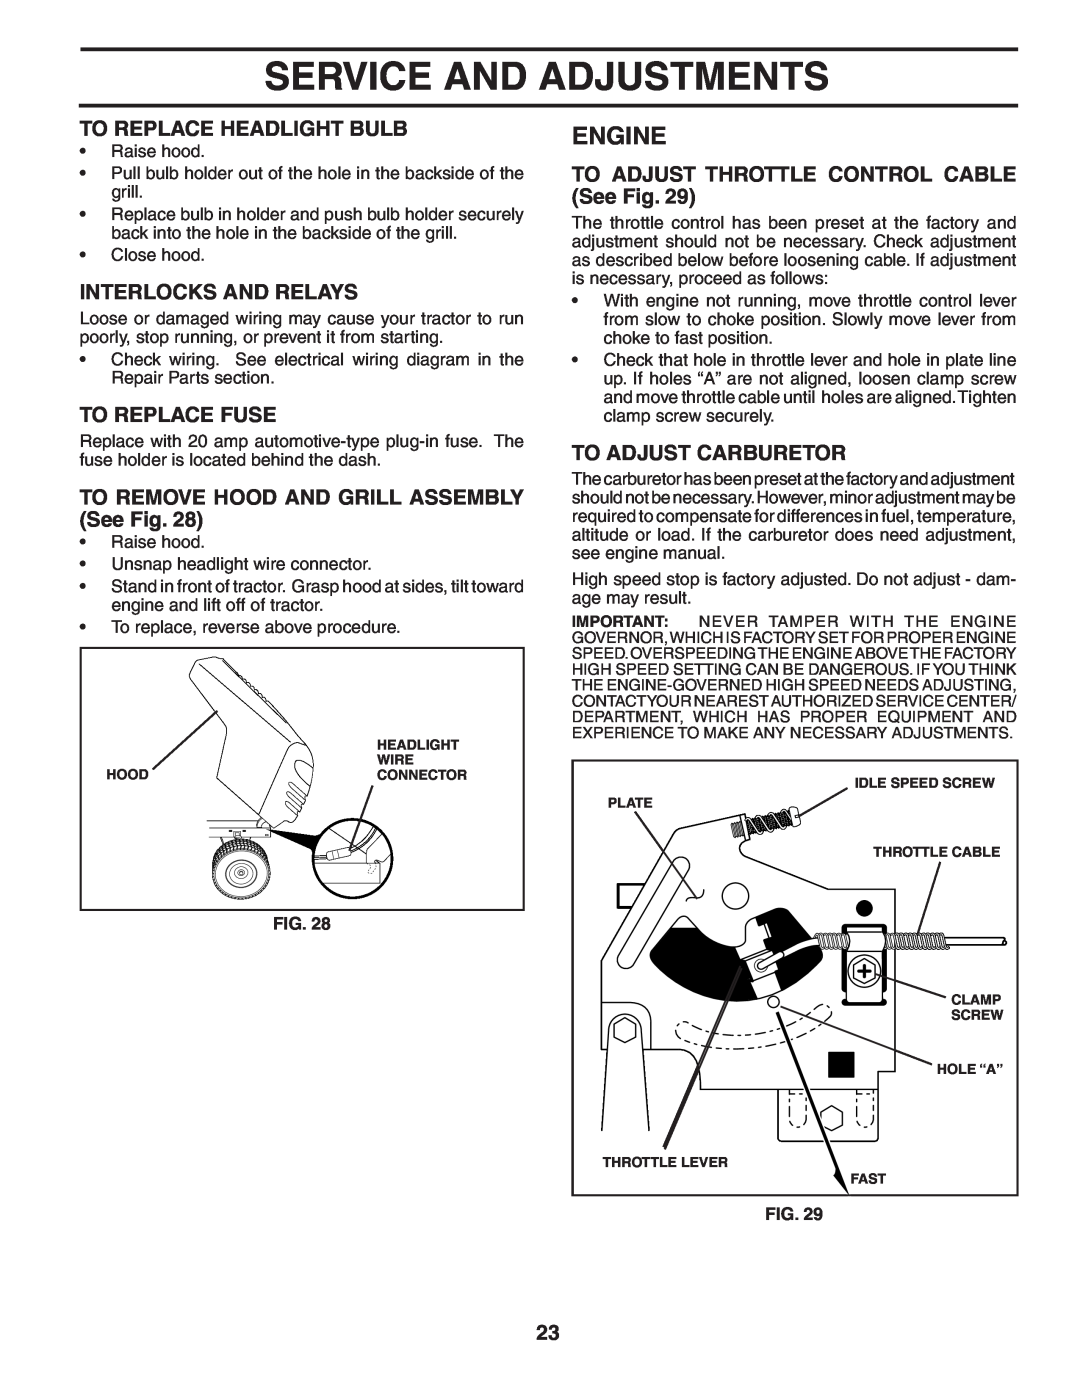 Weed Eater WE165T42A manual To Replace Headlight Bulb, Interlocks And Relays, To Replace Fuse, To Adjust Carburetor, Engine 